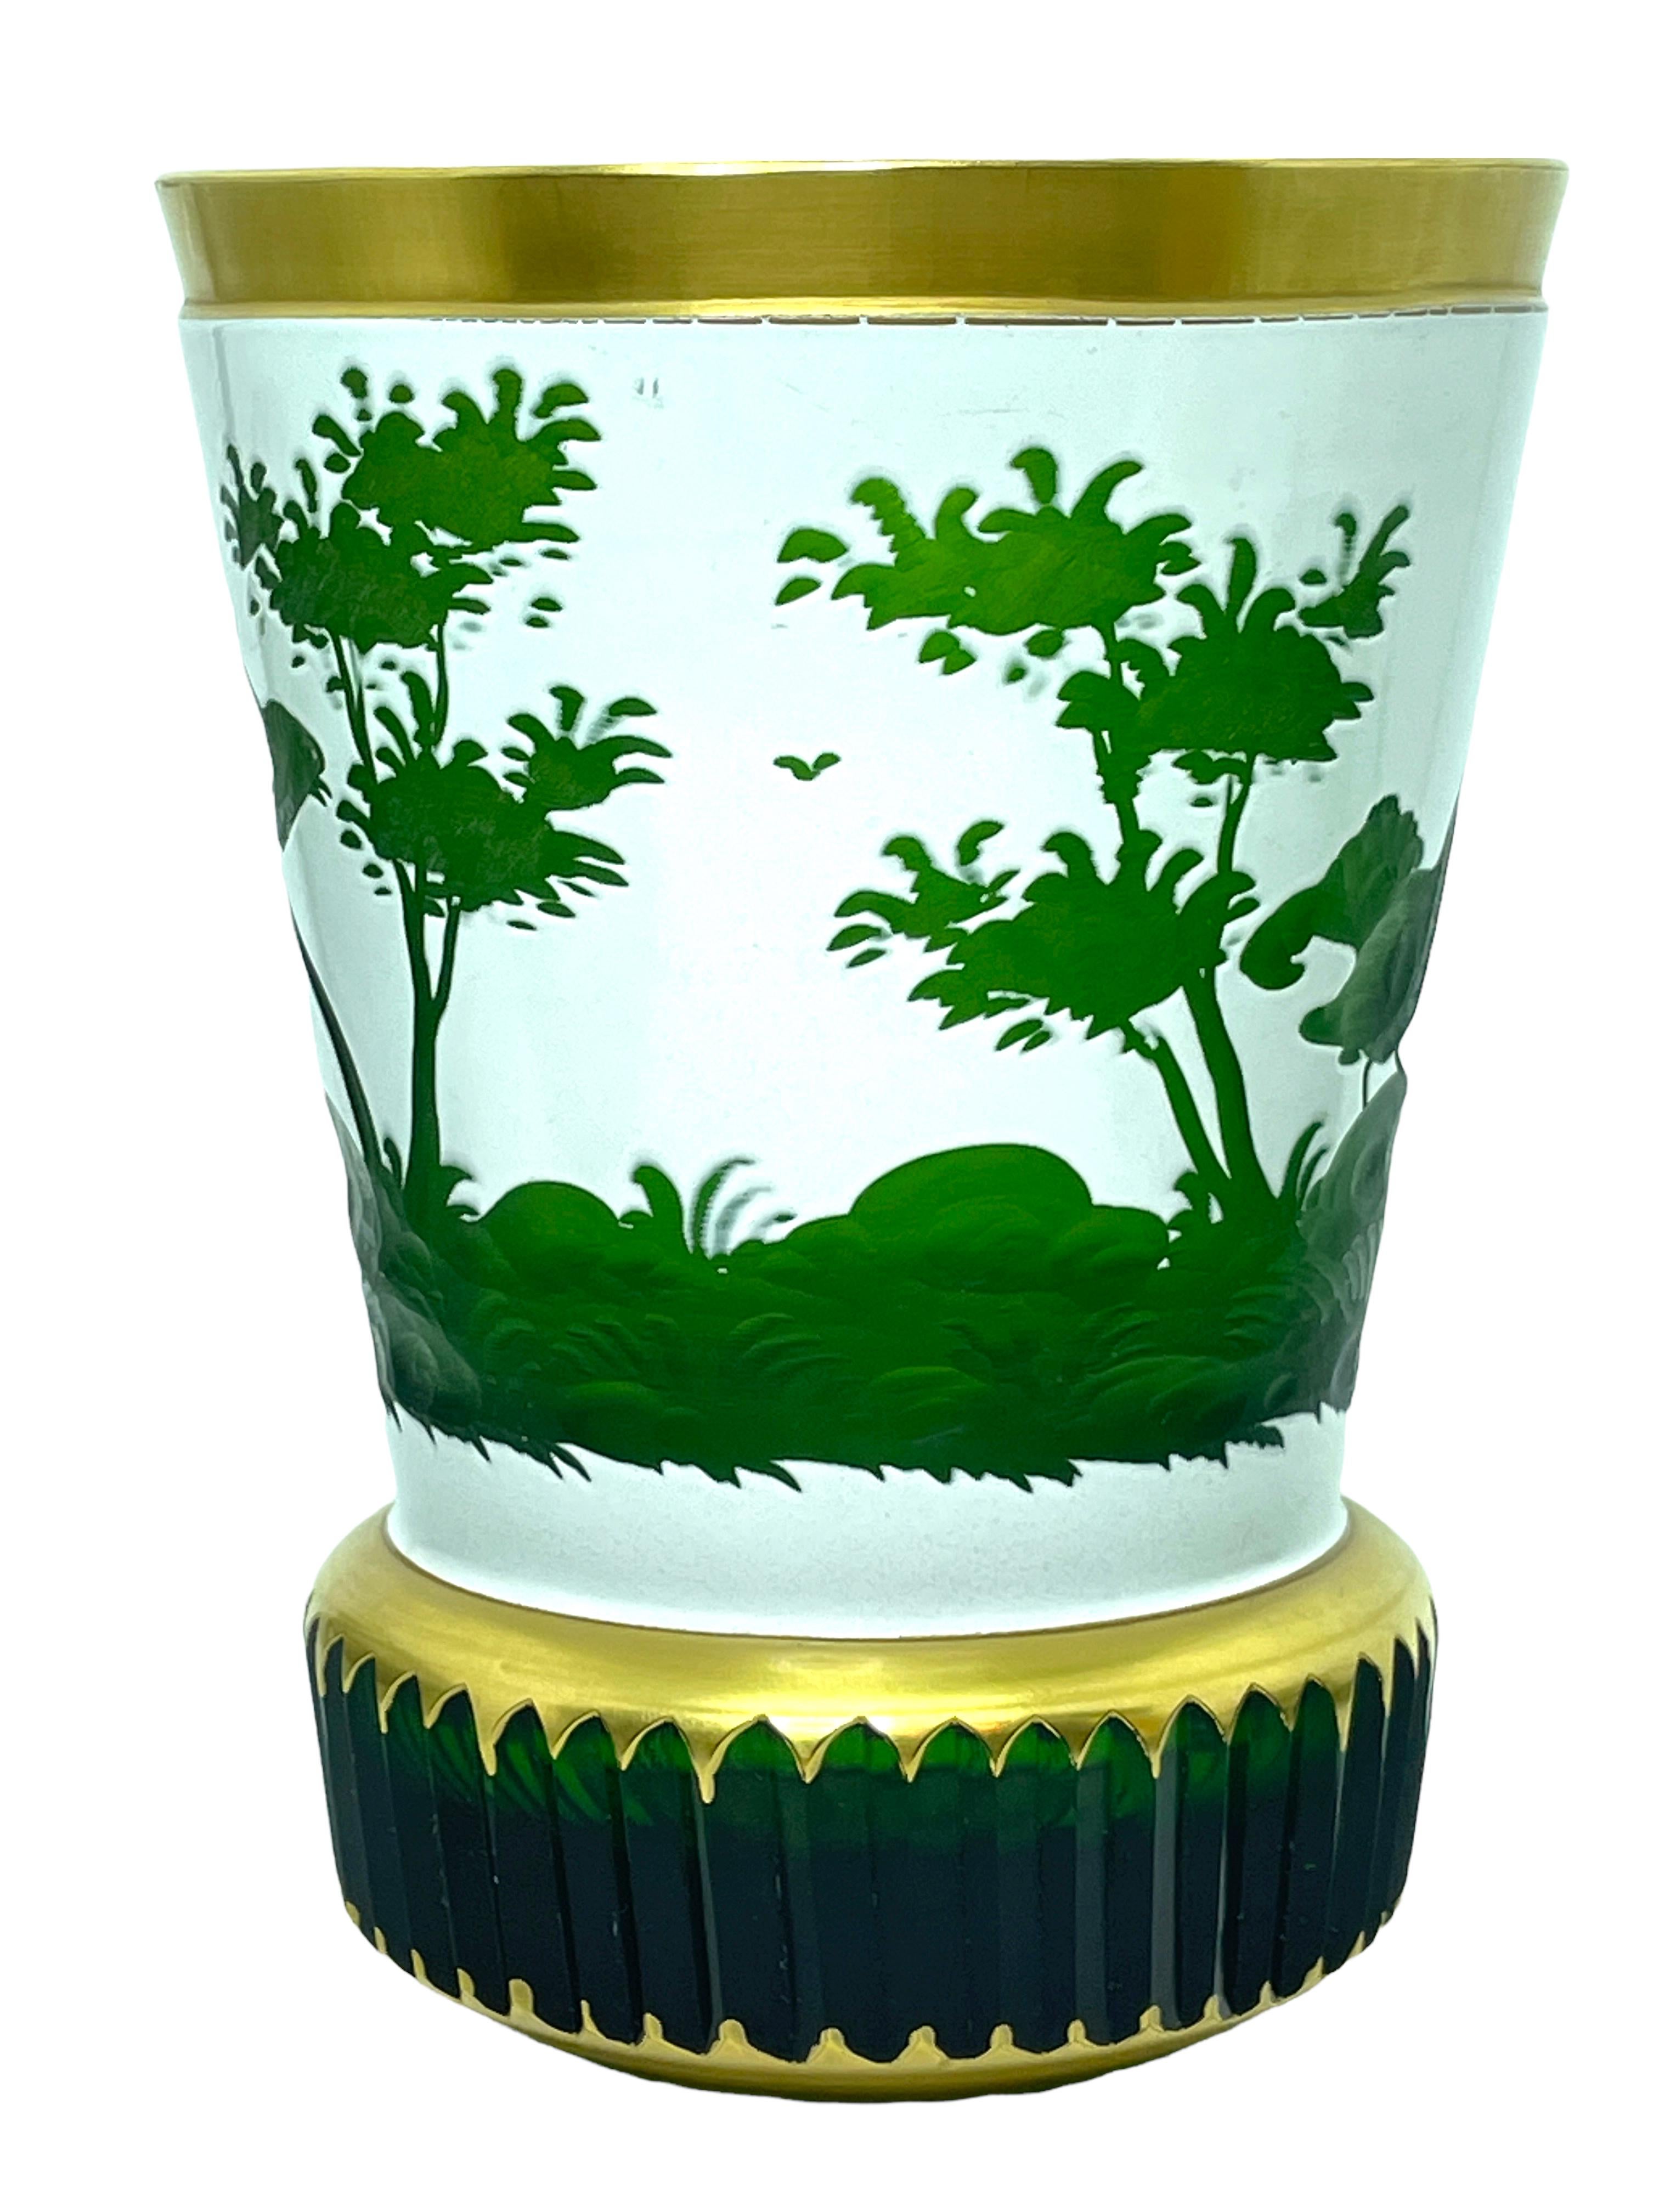 Czech Josephinenhutte Moser Style Green Colored Glass Gold and White, 1960s For Sale